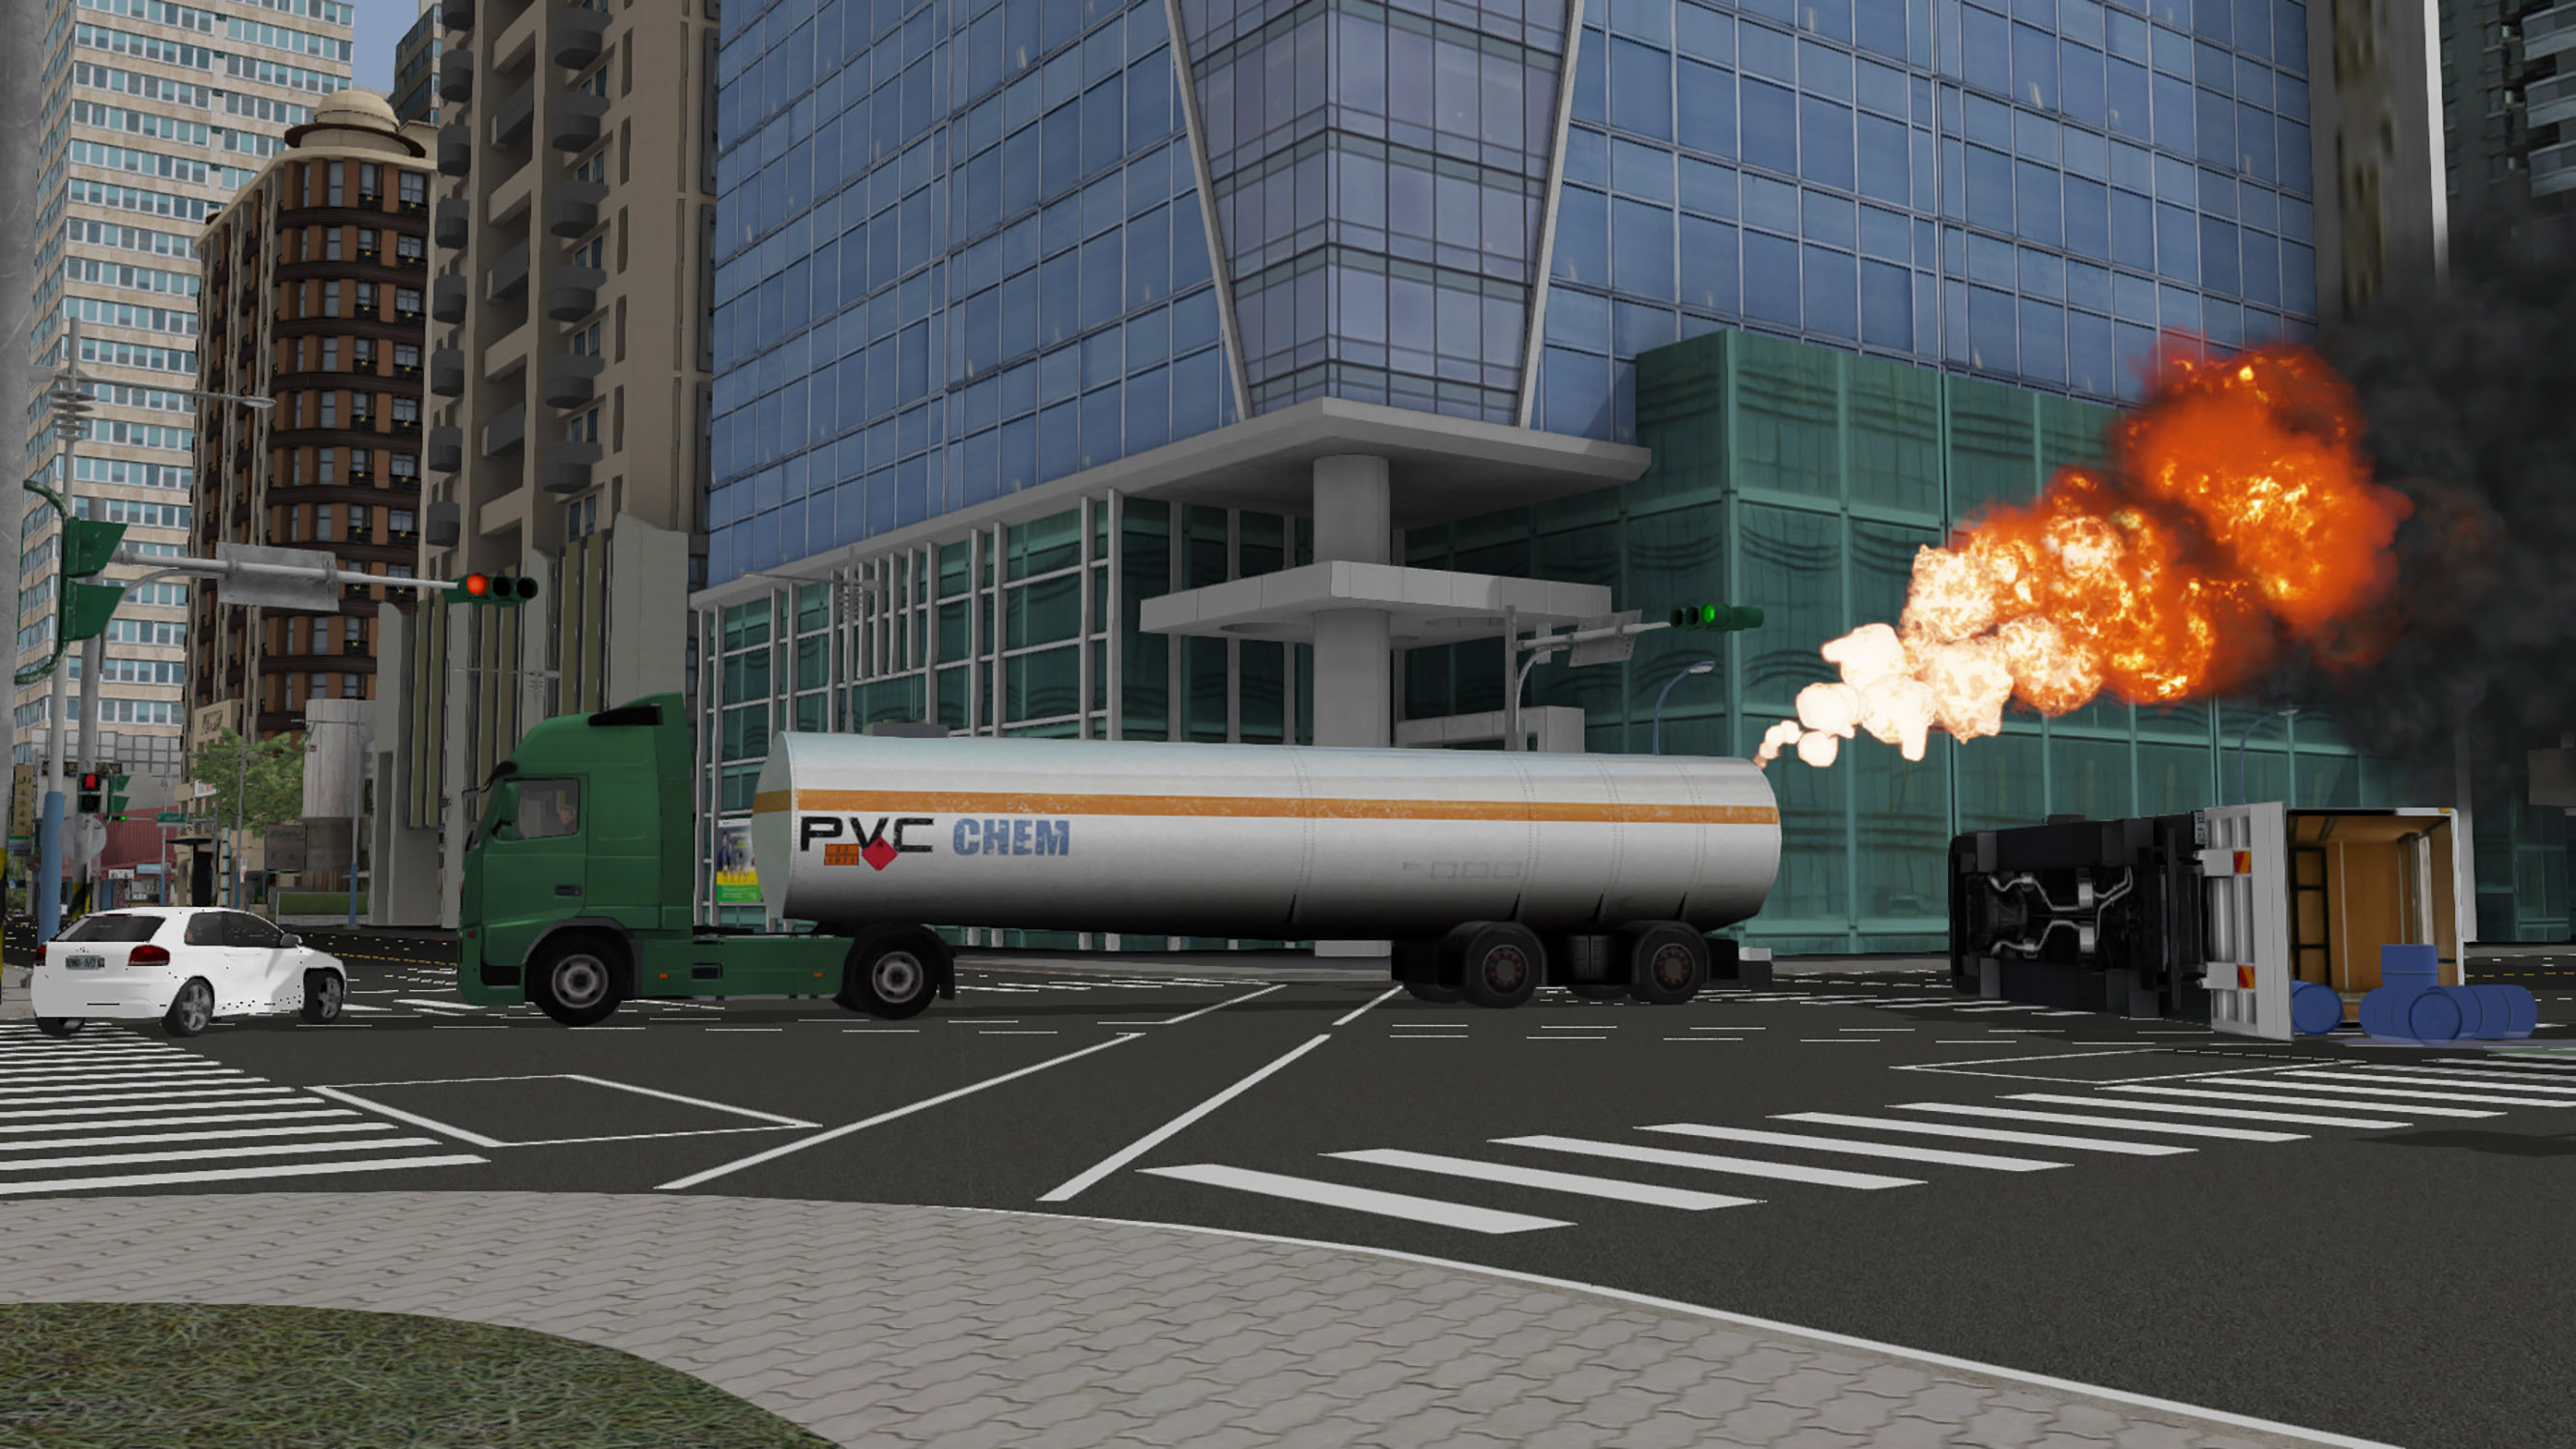 Tanker truck caught fire after a traffic accident with toxic gas actively spreading with the wind changing dynamically.